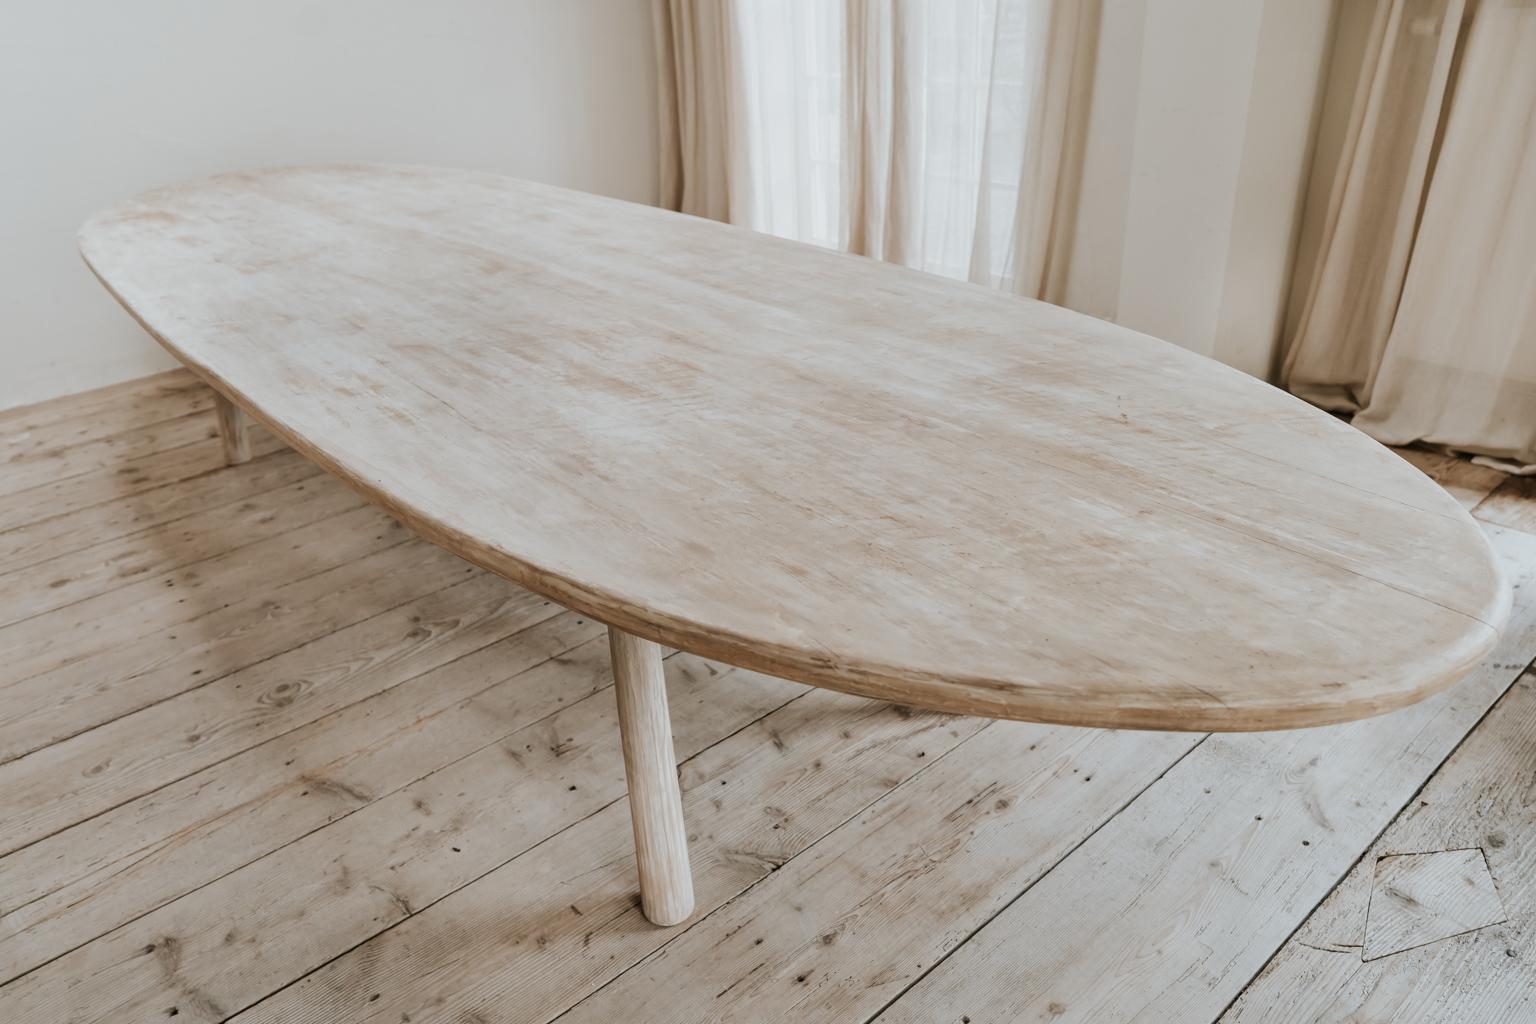 This extra large ellipse shaped dining table was created in my workshop,
made out of old poplarwood this table can easily seat 16 people,
can be used as dining table as well as conference table.